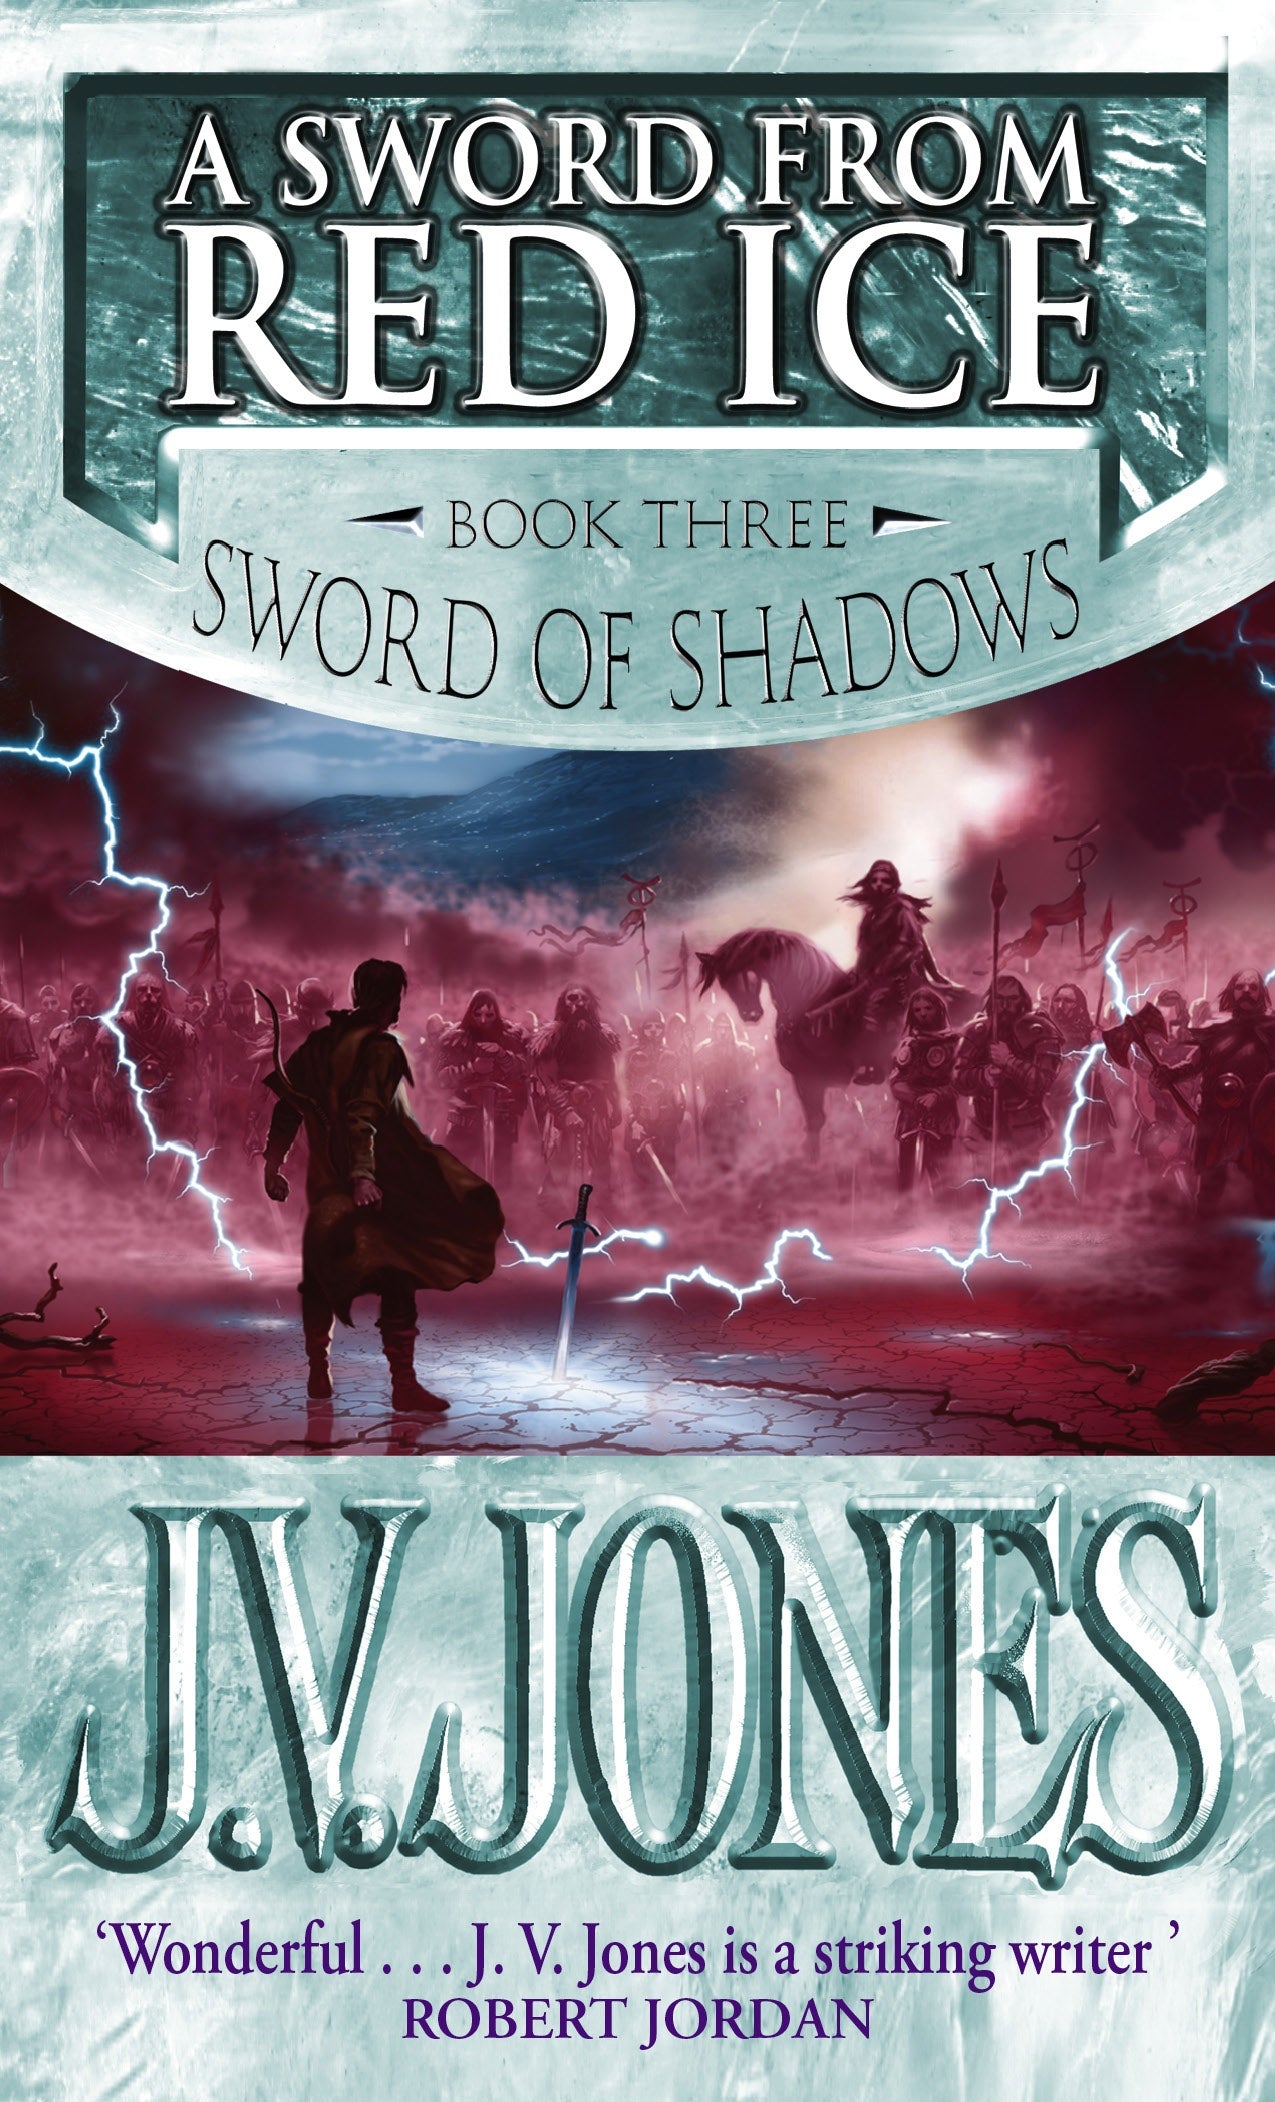 A Sword From Red Ice by J V Jones